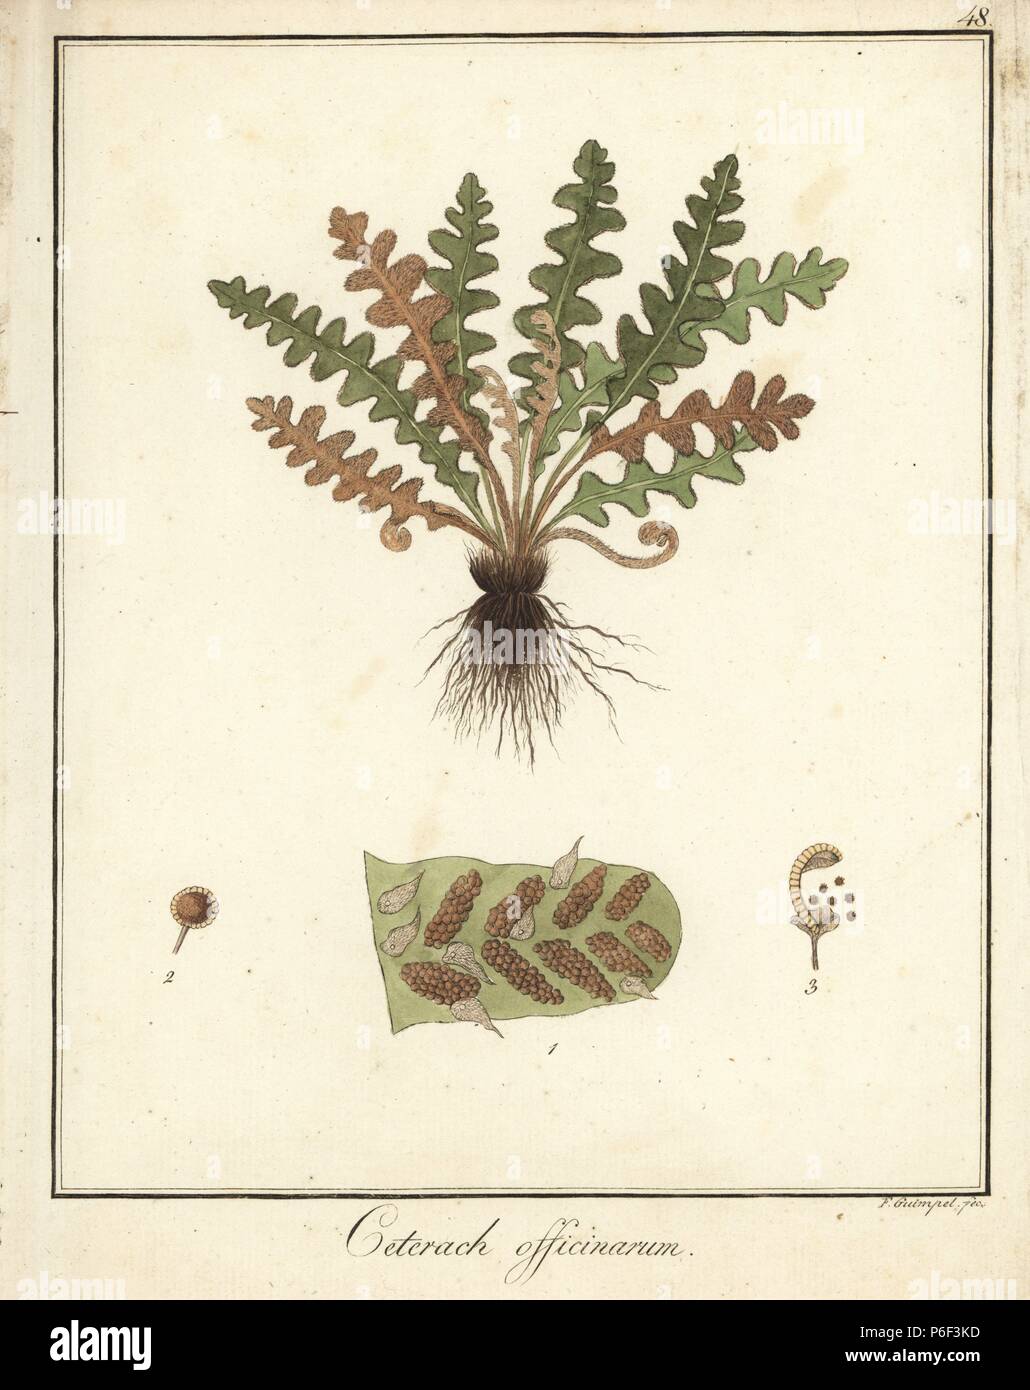 Rustyback fern, Asplenium ceterach. Handcoloured copperplate engraving by F. Guimpel from Dr. Friedrich Gottlob Hayne's Medical Botany, Berlin, 1822. Hayne (1763-1832) was a German botanist, apothecary and professor of pharmaceutical botany at Berlin University. Stock Photo